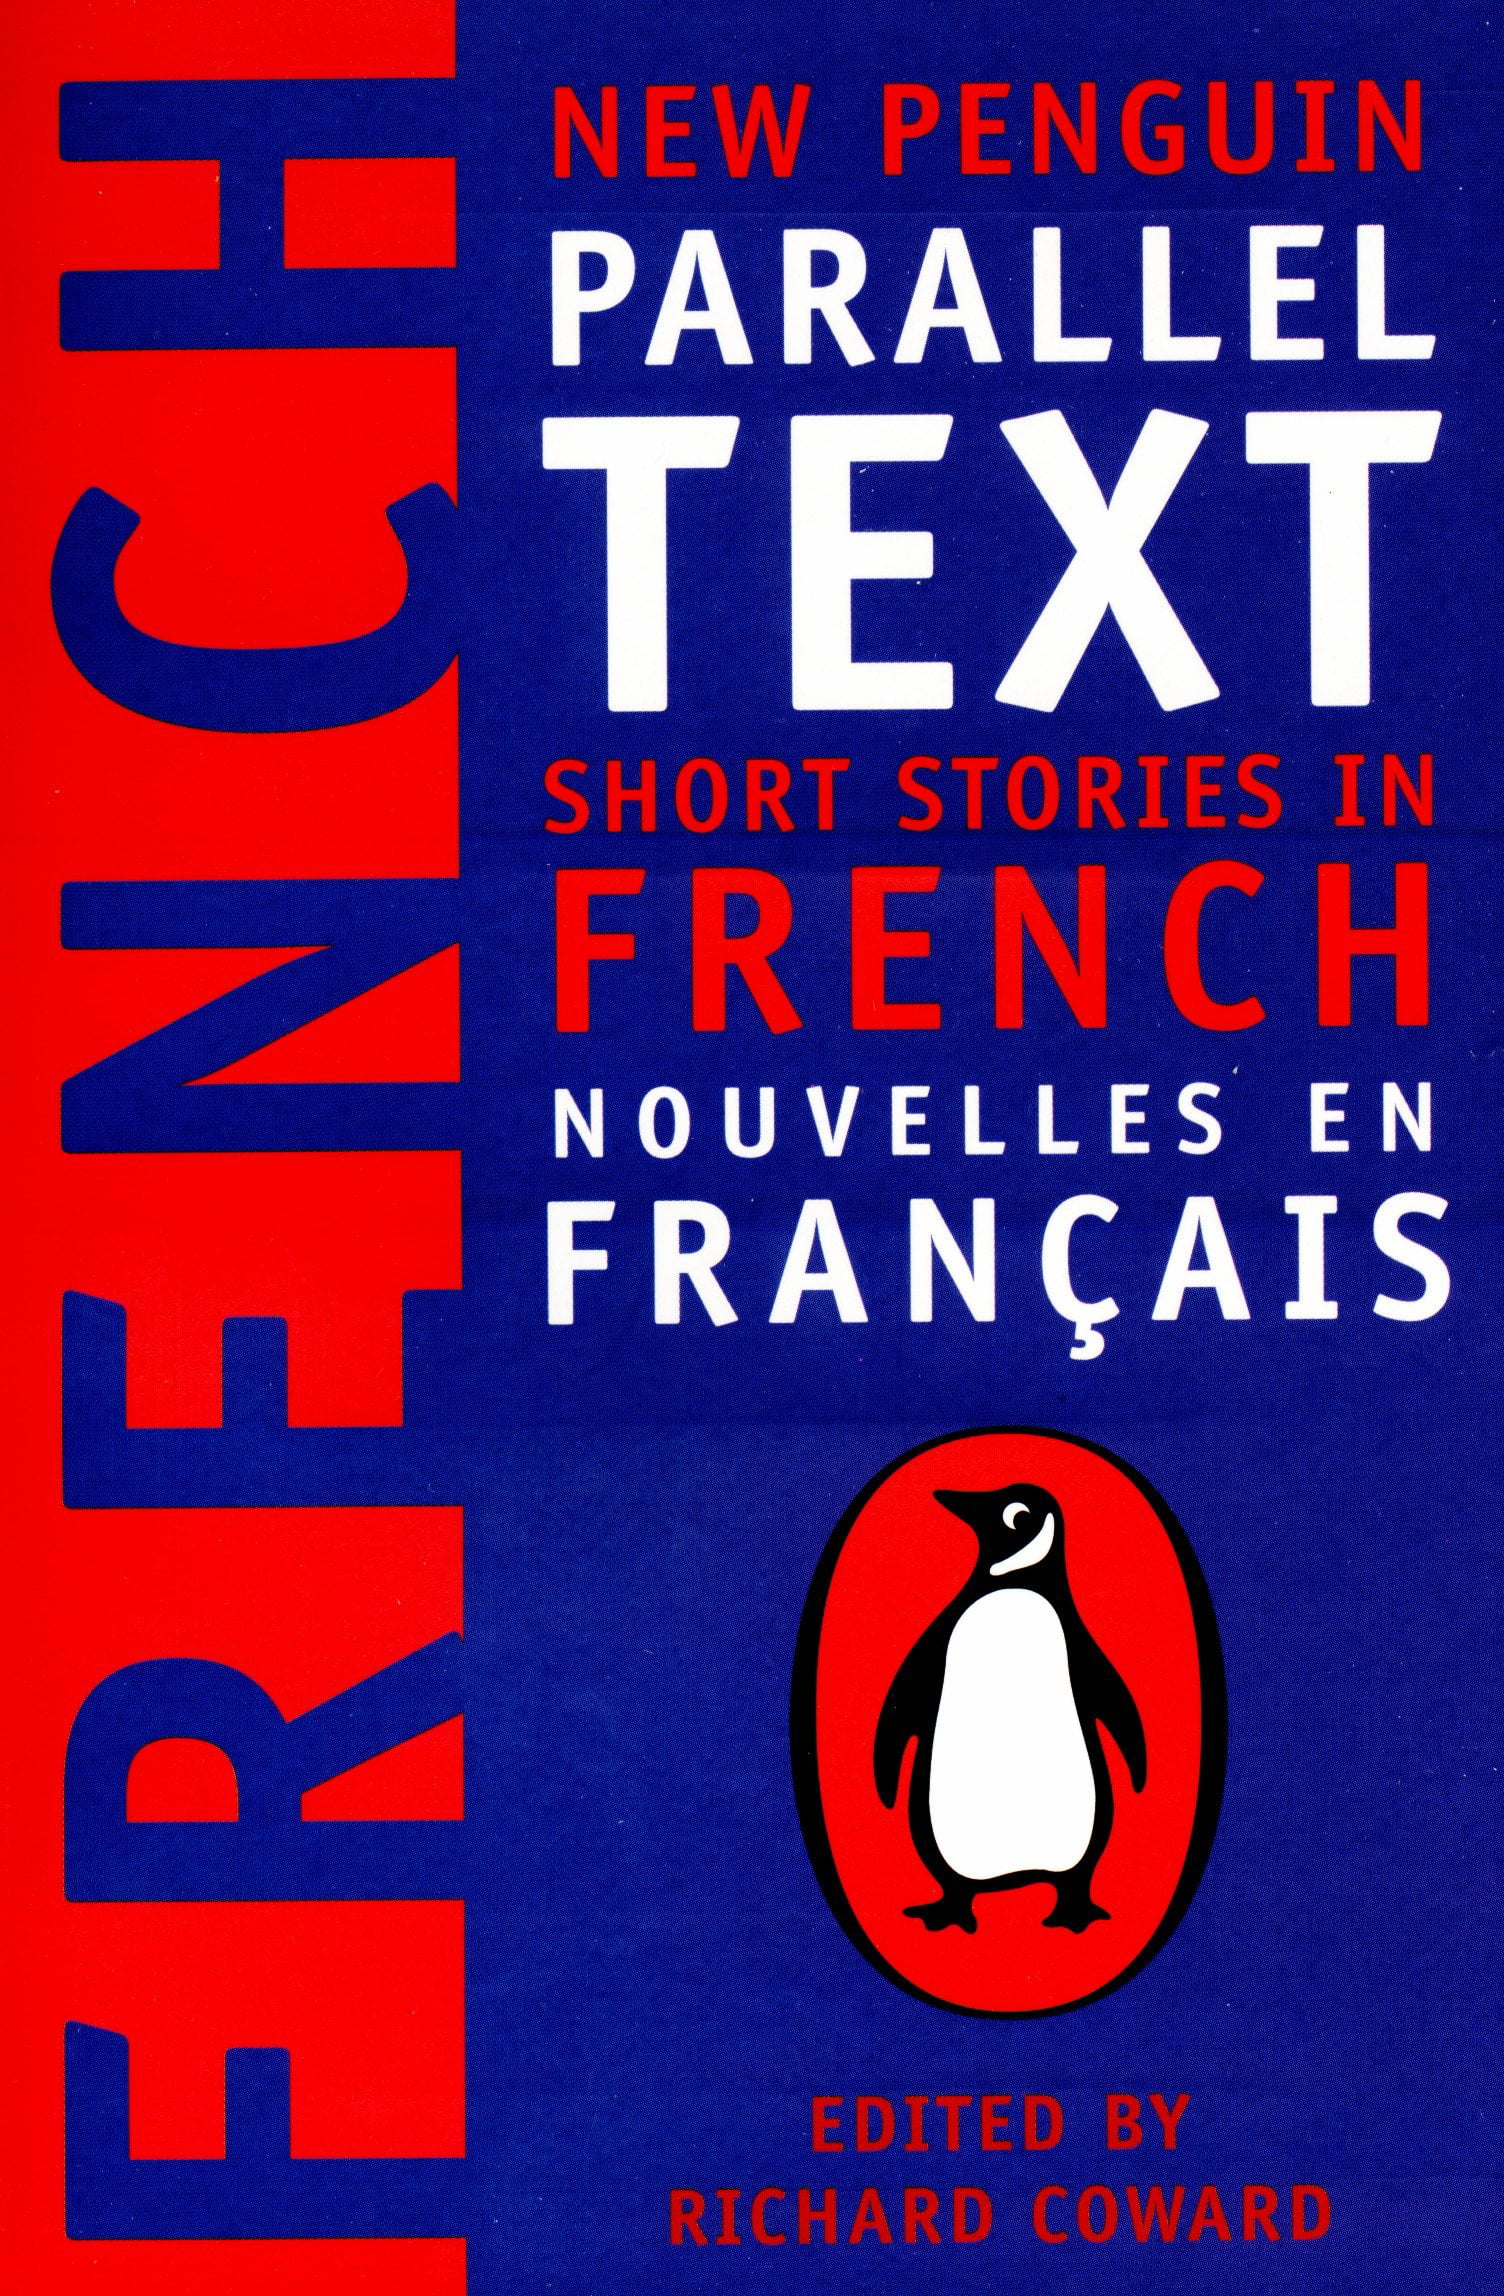 Short Stories in French New Penguin Parallel Text